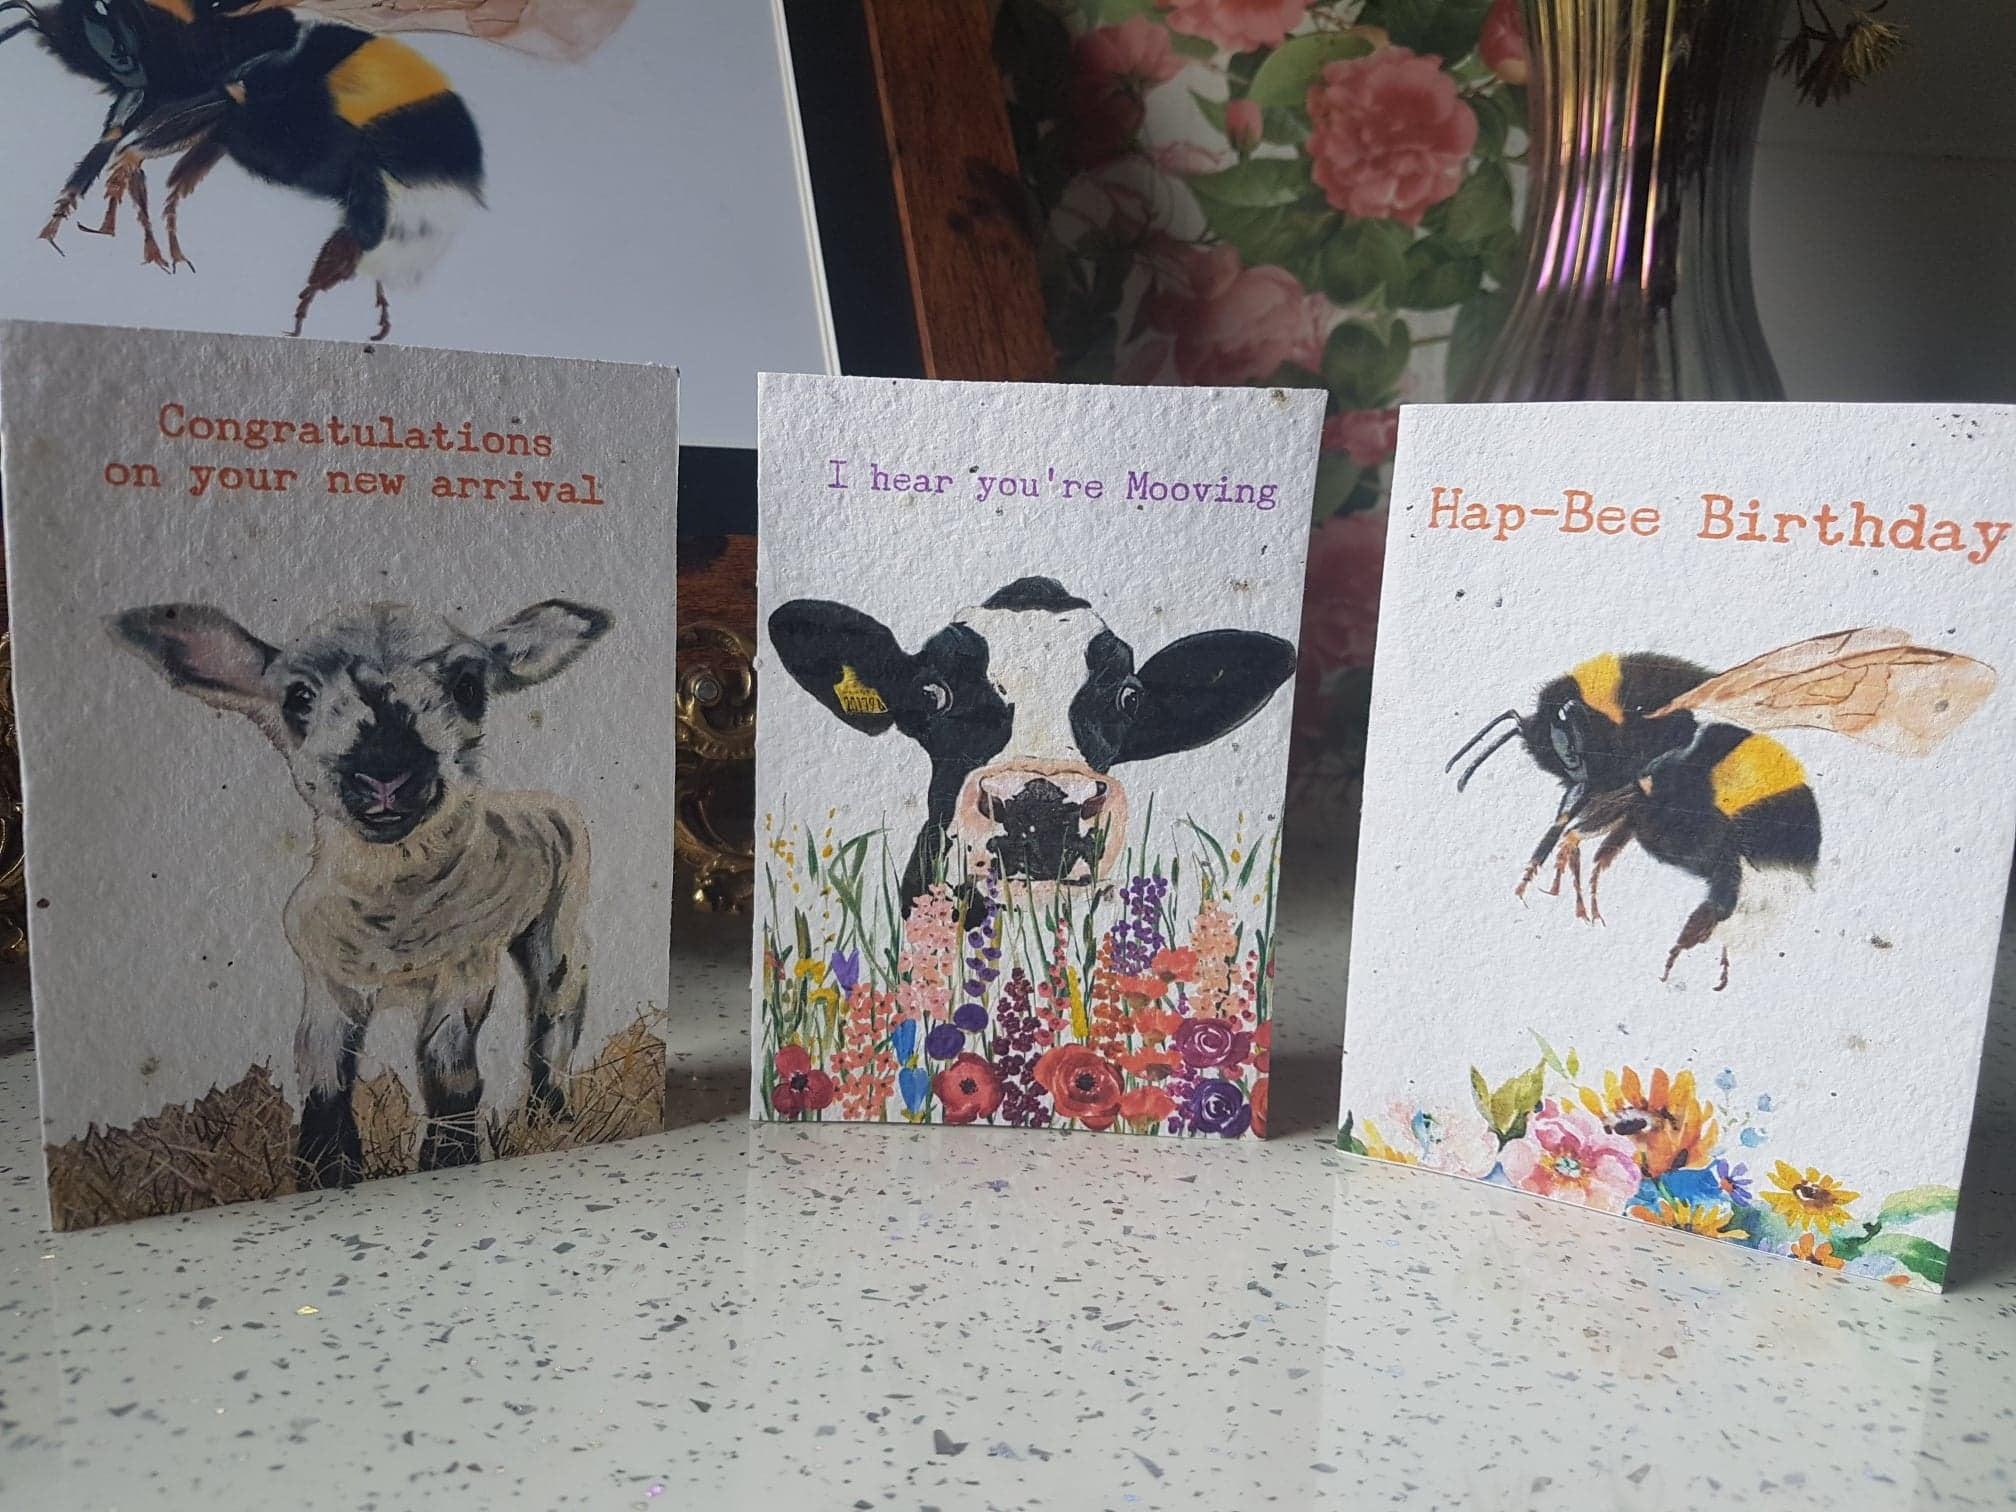 Eco and Vegan friendly PLANTABLE  flower Seed Cards-Get well soon- Bee  friendly cards- Piggy- #plantable seed cards- Grow me-Don't throw me